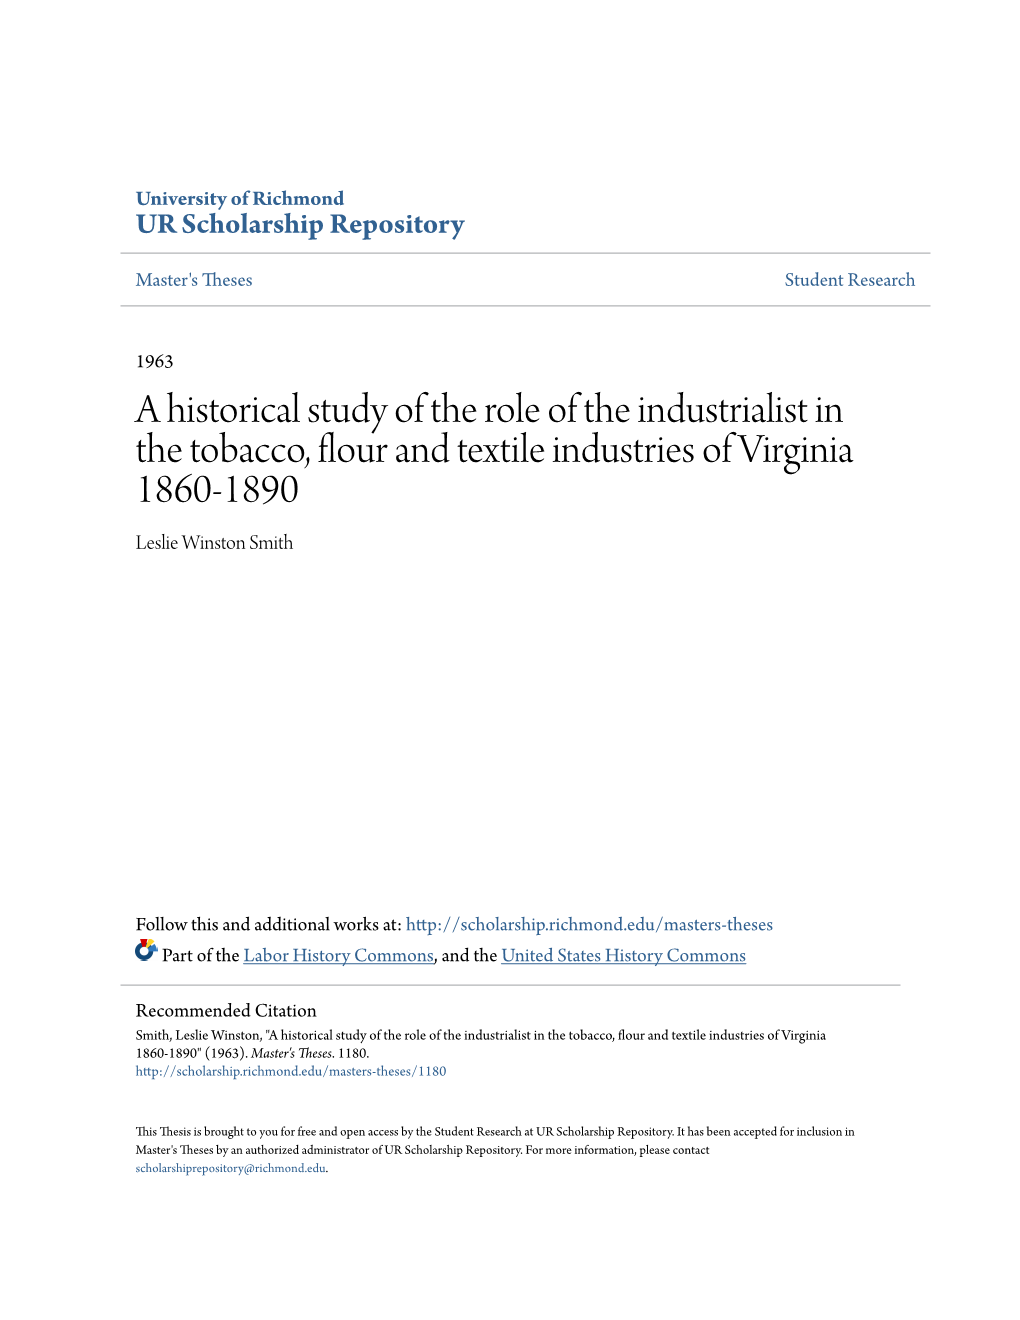 A Historical Study of the Role of the Industrialist in the Tobacco, Flour And